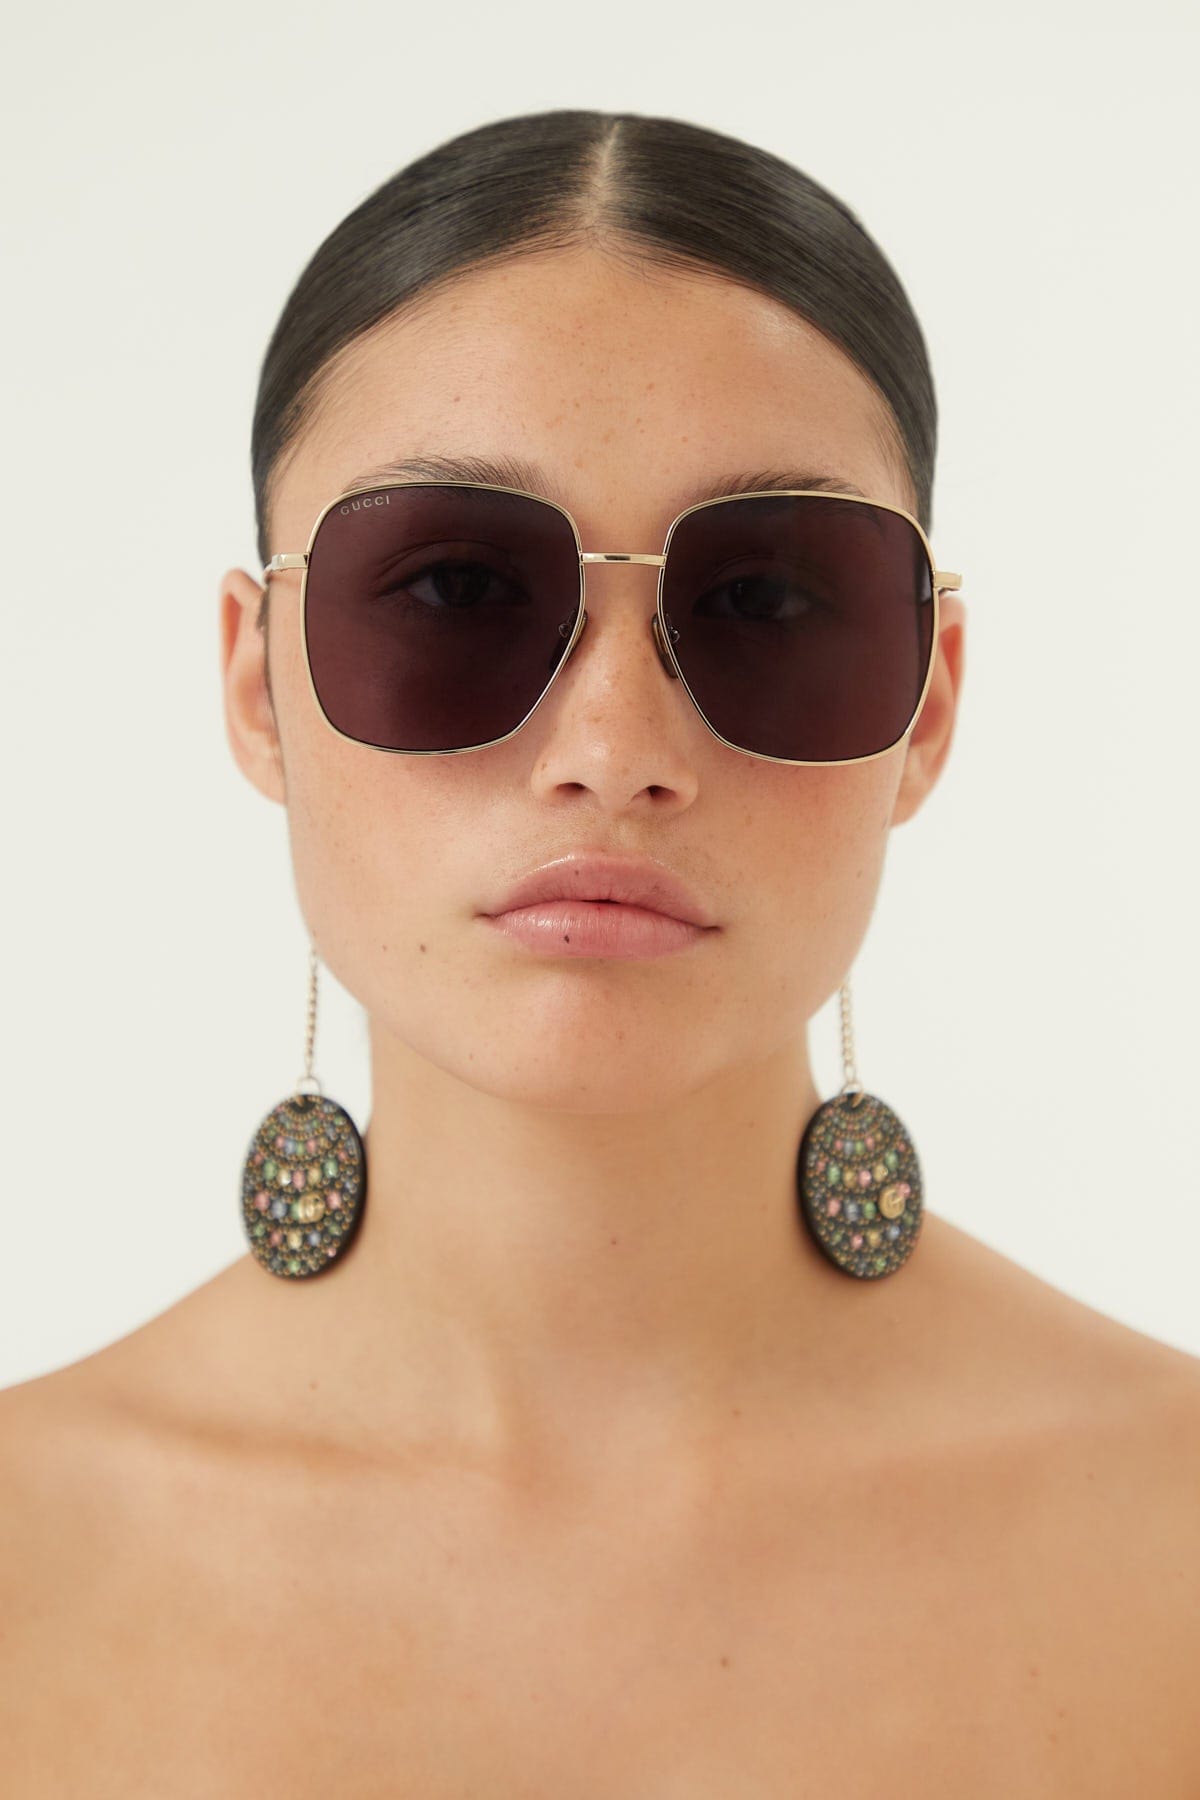 Gucci gold squared sunglasses with disco ball charms - Eyewear Club